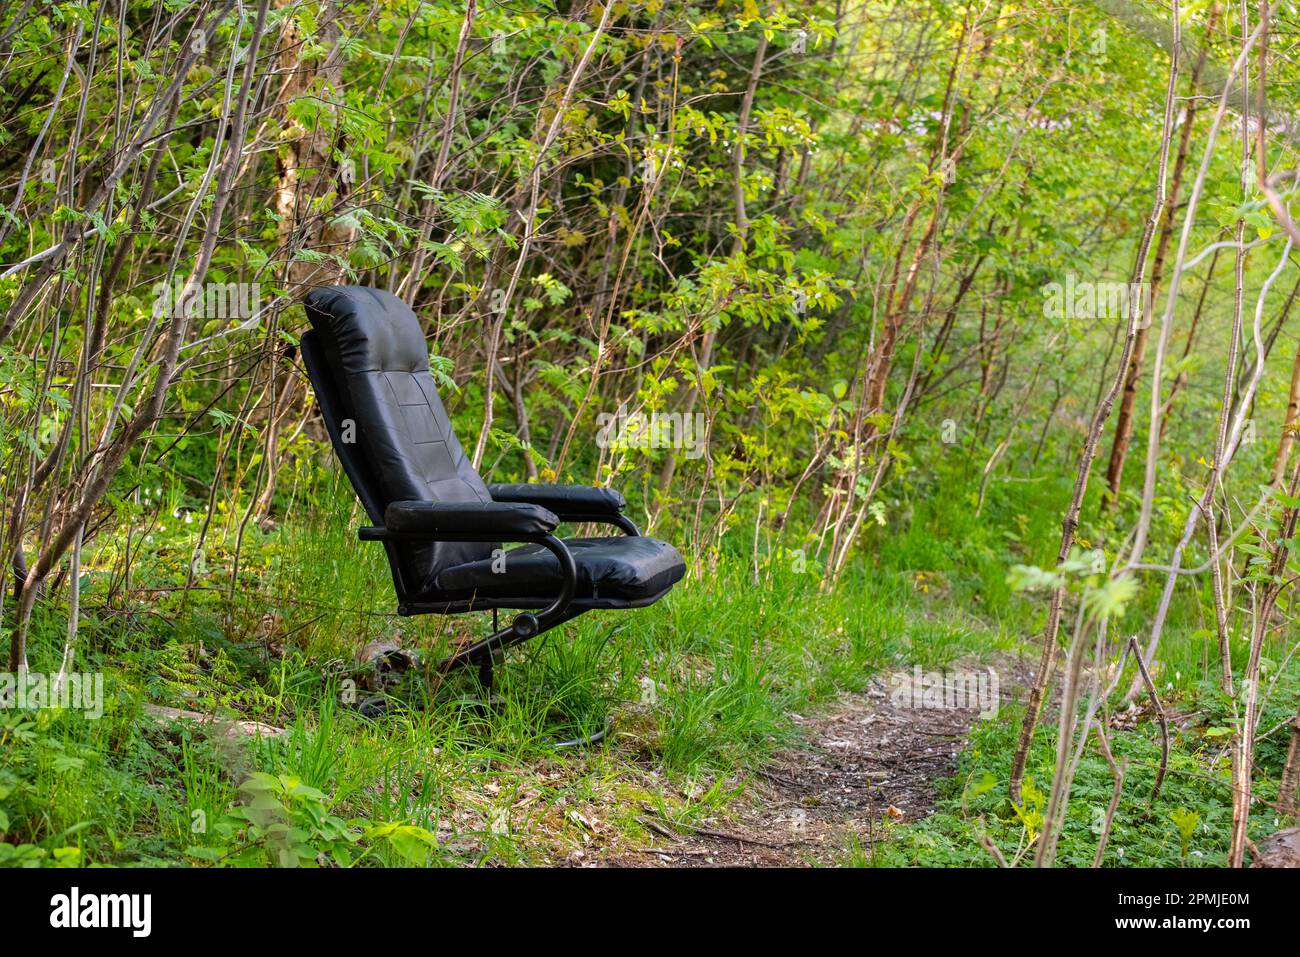 A misplaced recliner chair by a forest path Stock Photo